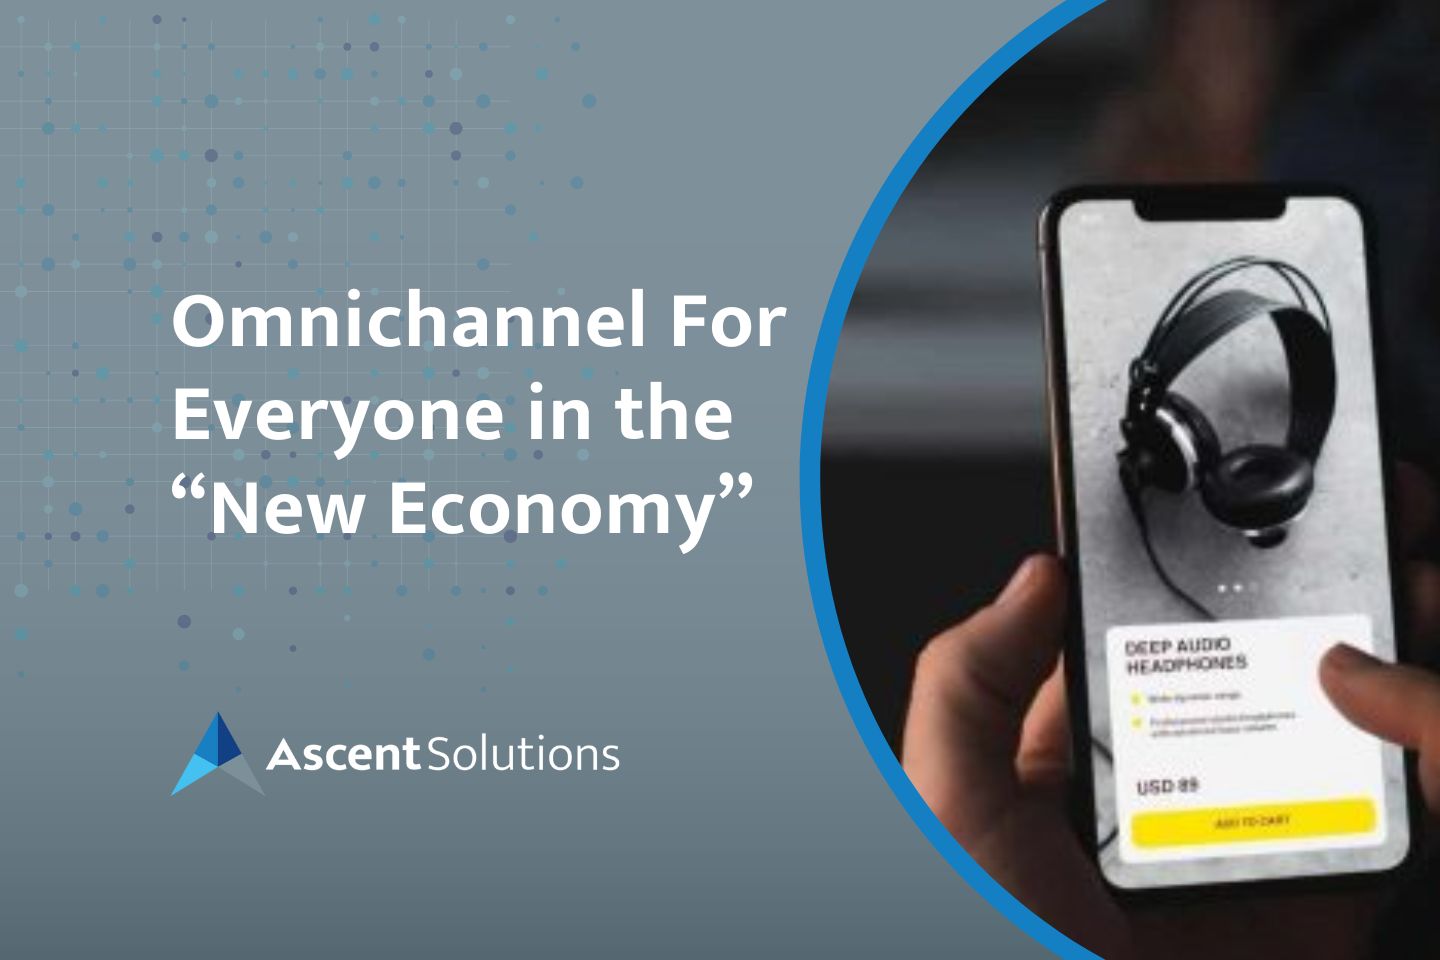 Omnichannel For Everyone in the New Economy